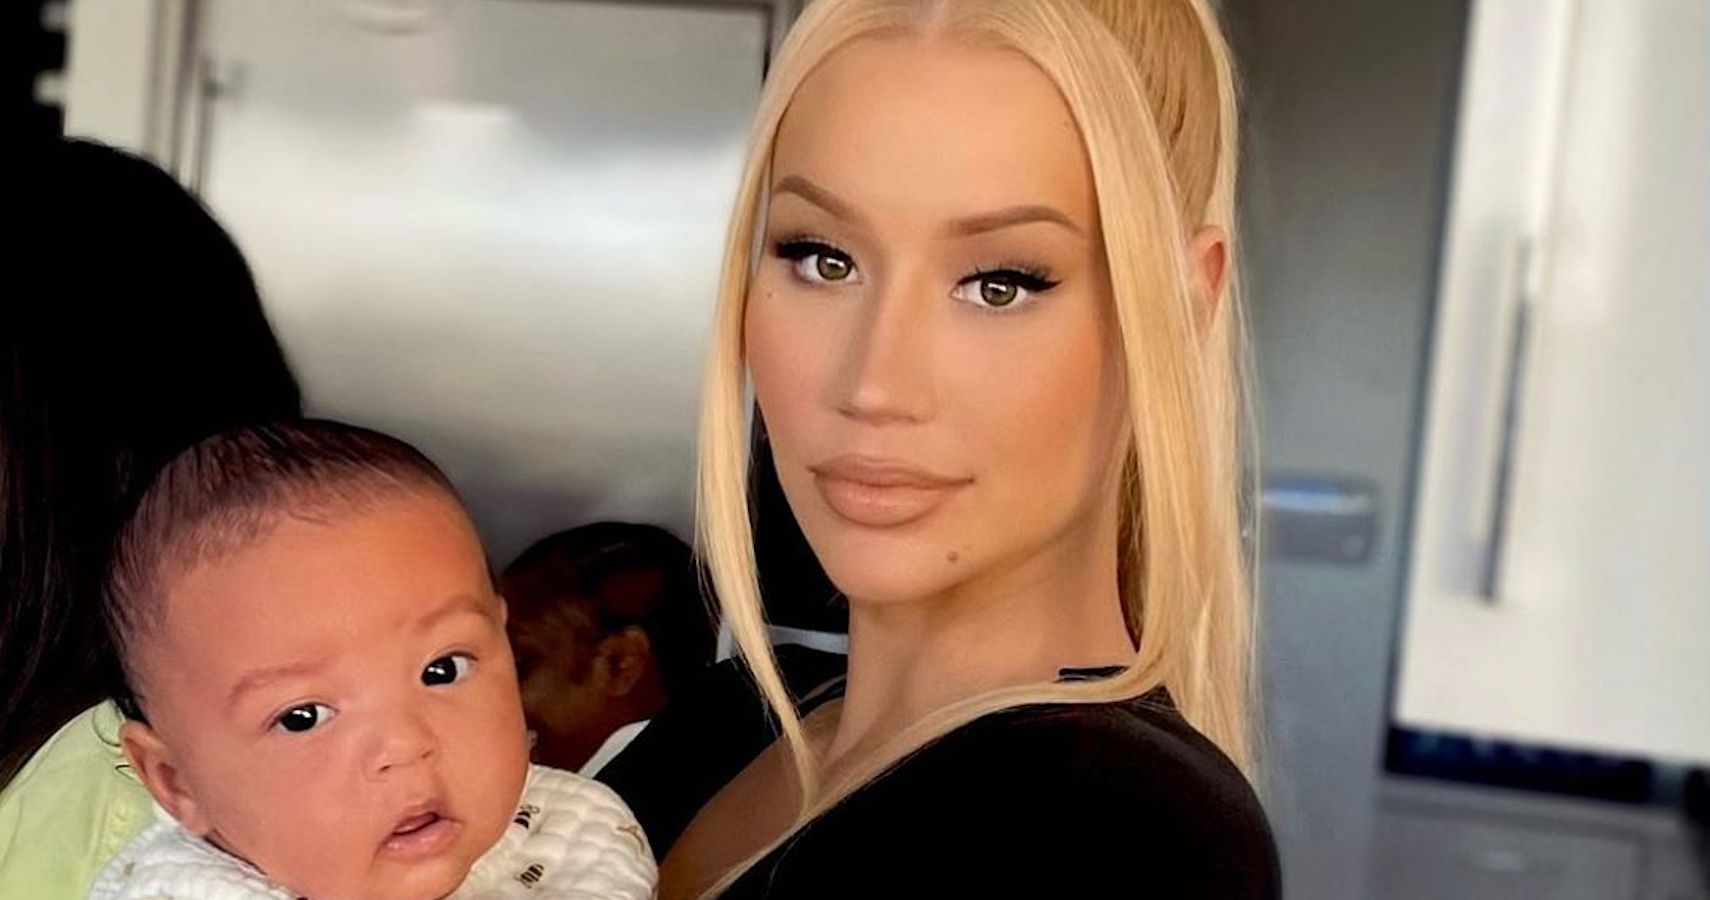 Iggy Azalea posts first photos of son after breakup with Playboi Carti